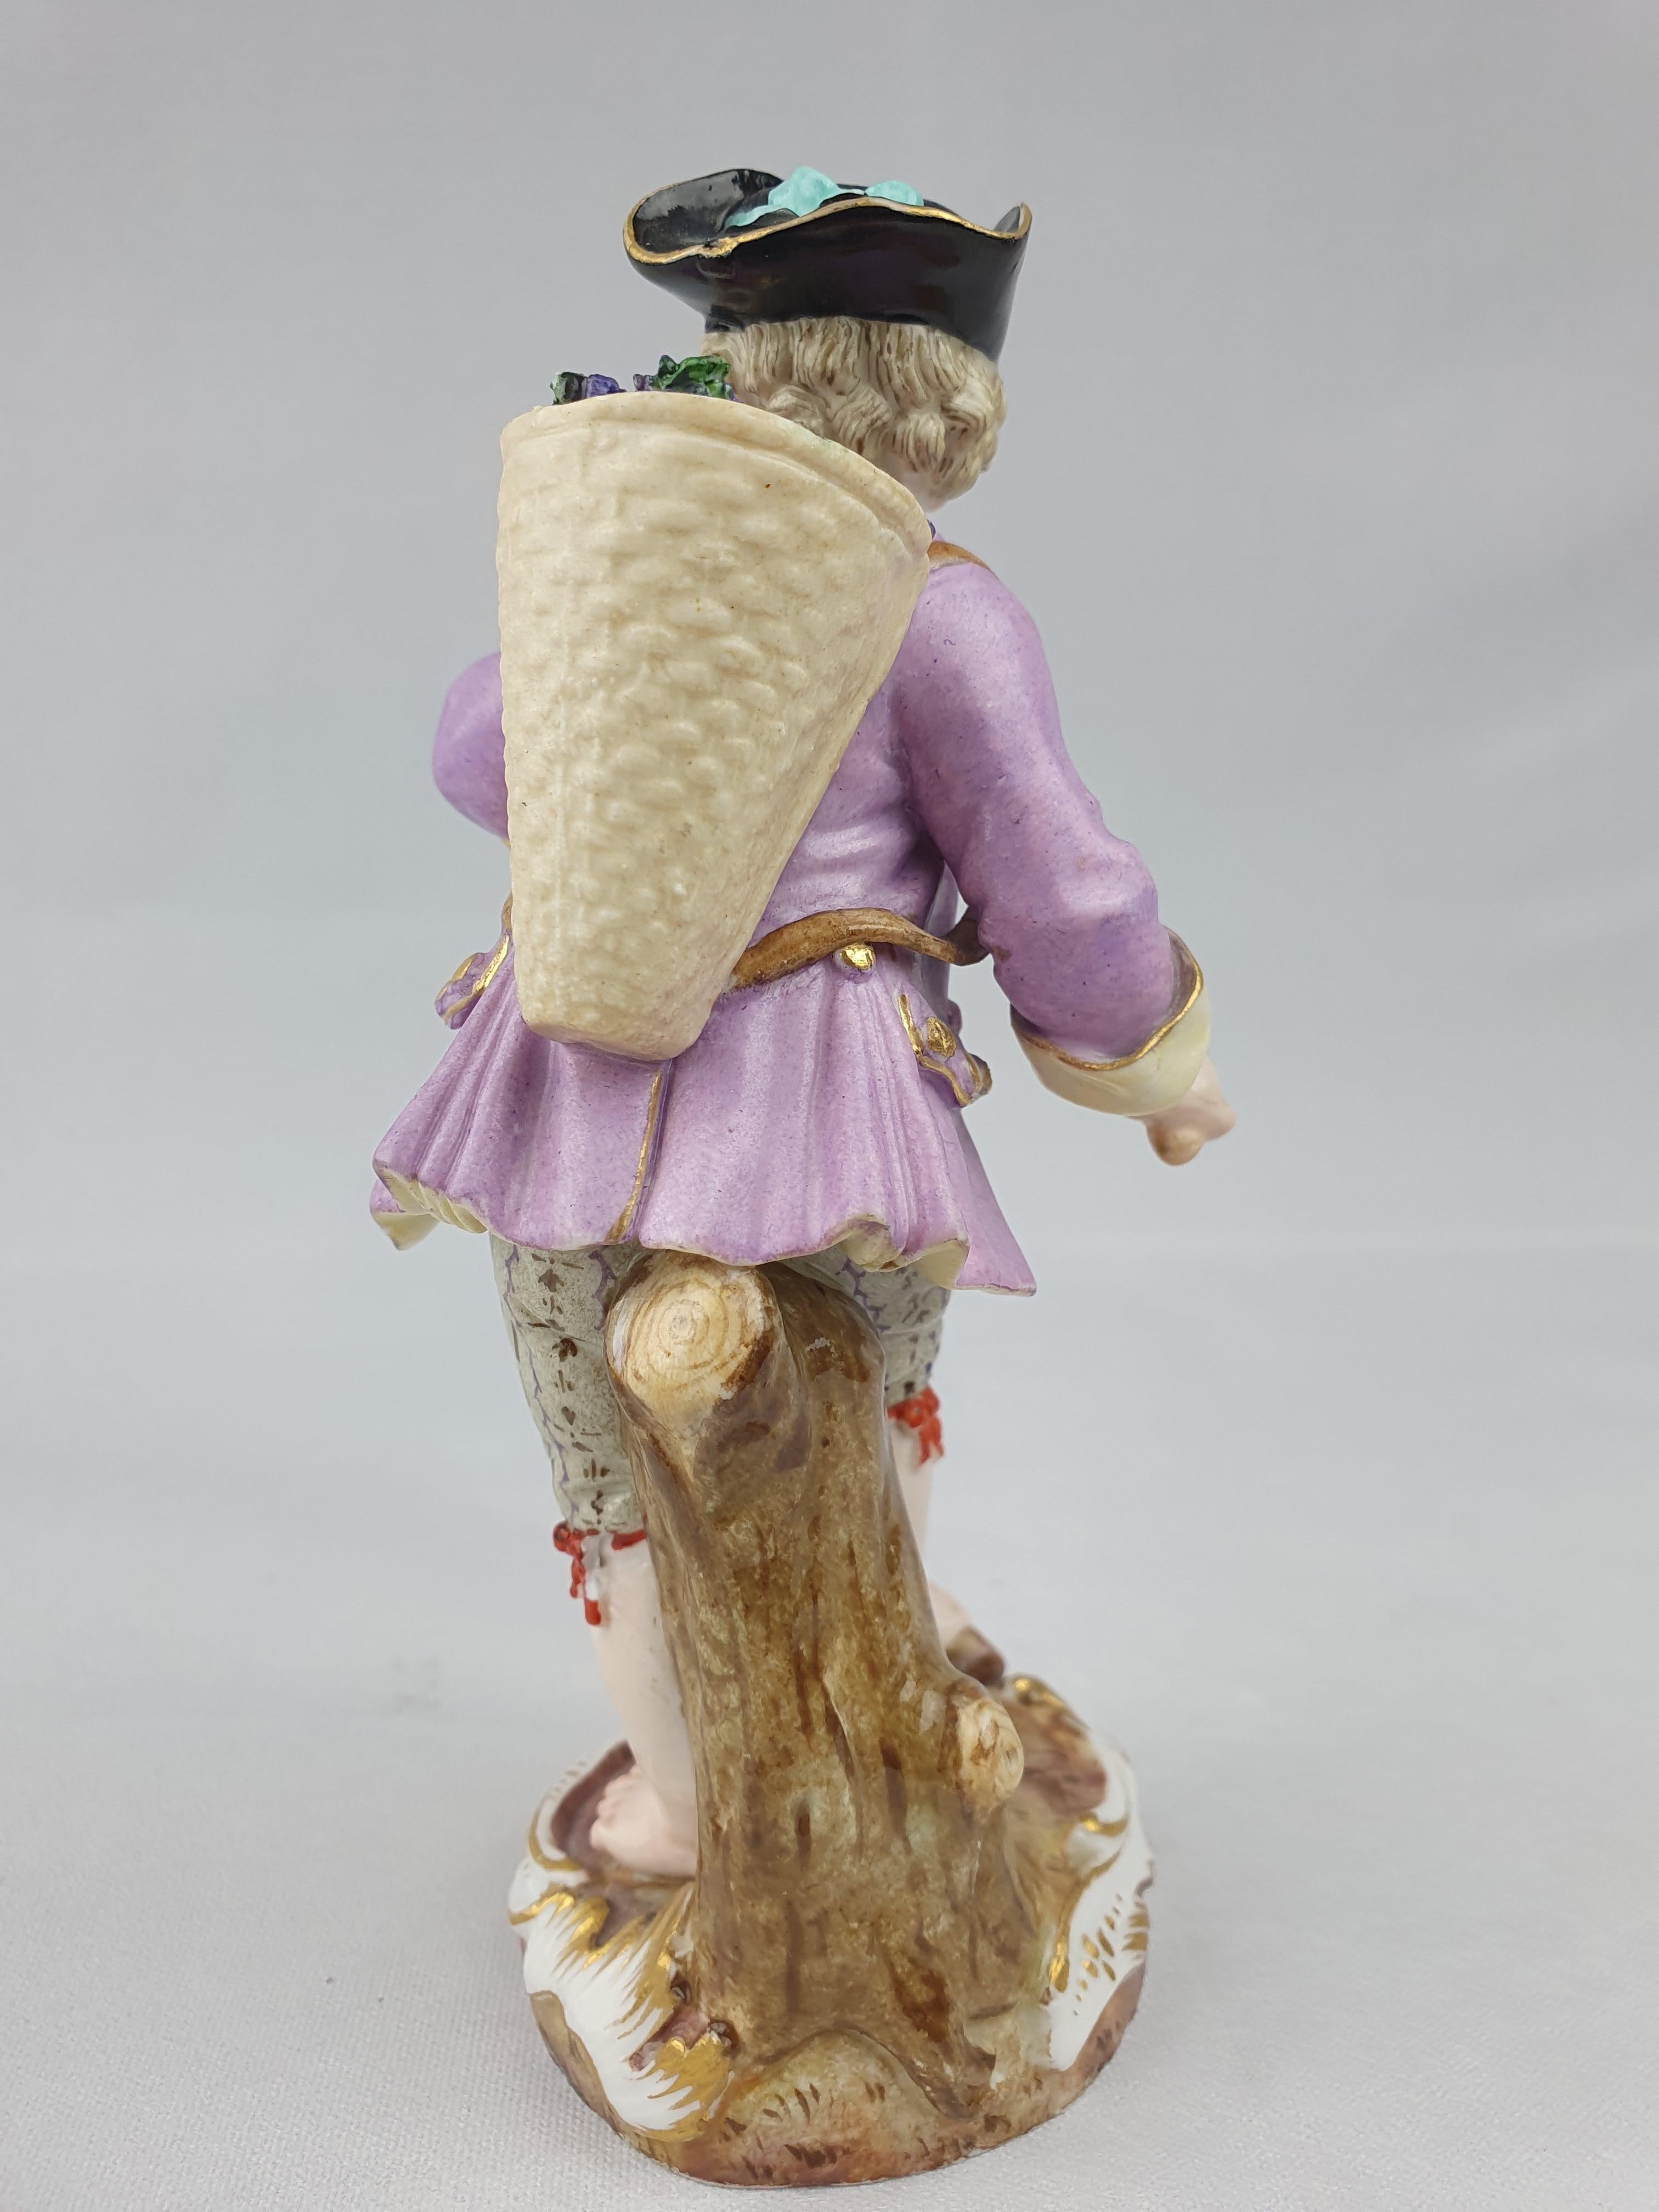 Meissen Grape Collector first modelled by J J Kaendler 1740

Number 8 From a series of Gardners

circa 1870

Height 13.5cm.